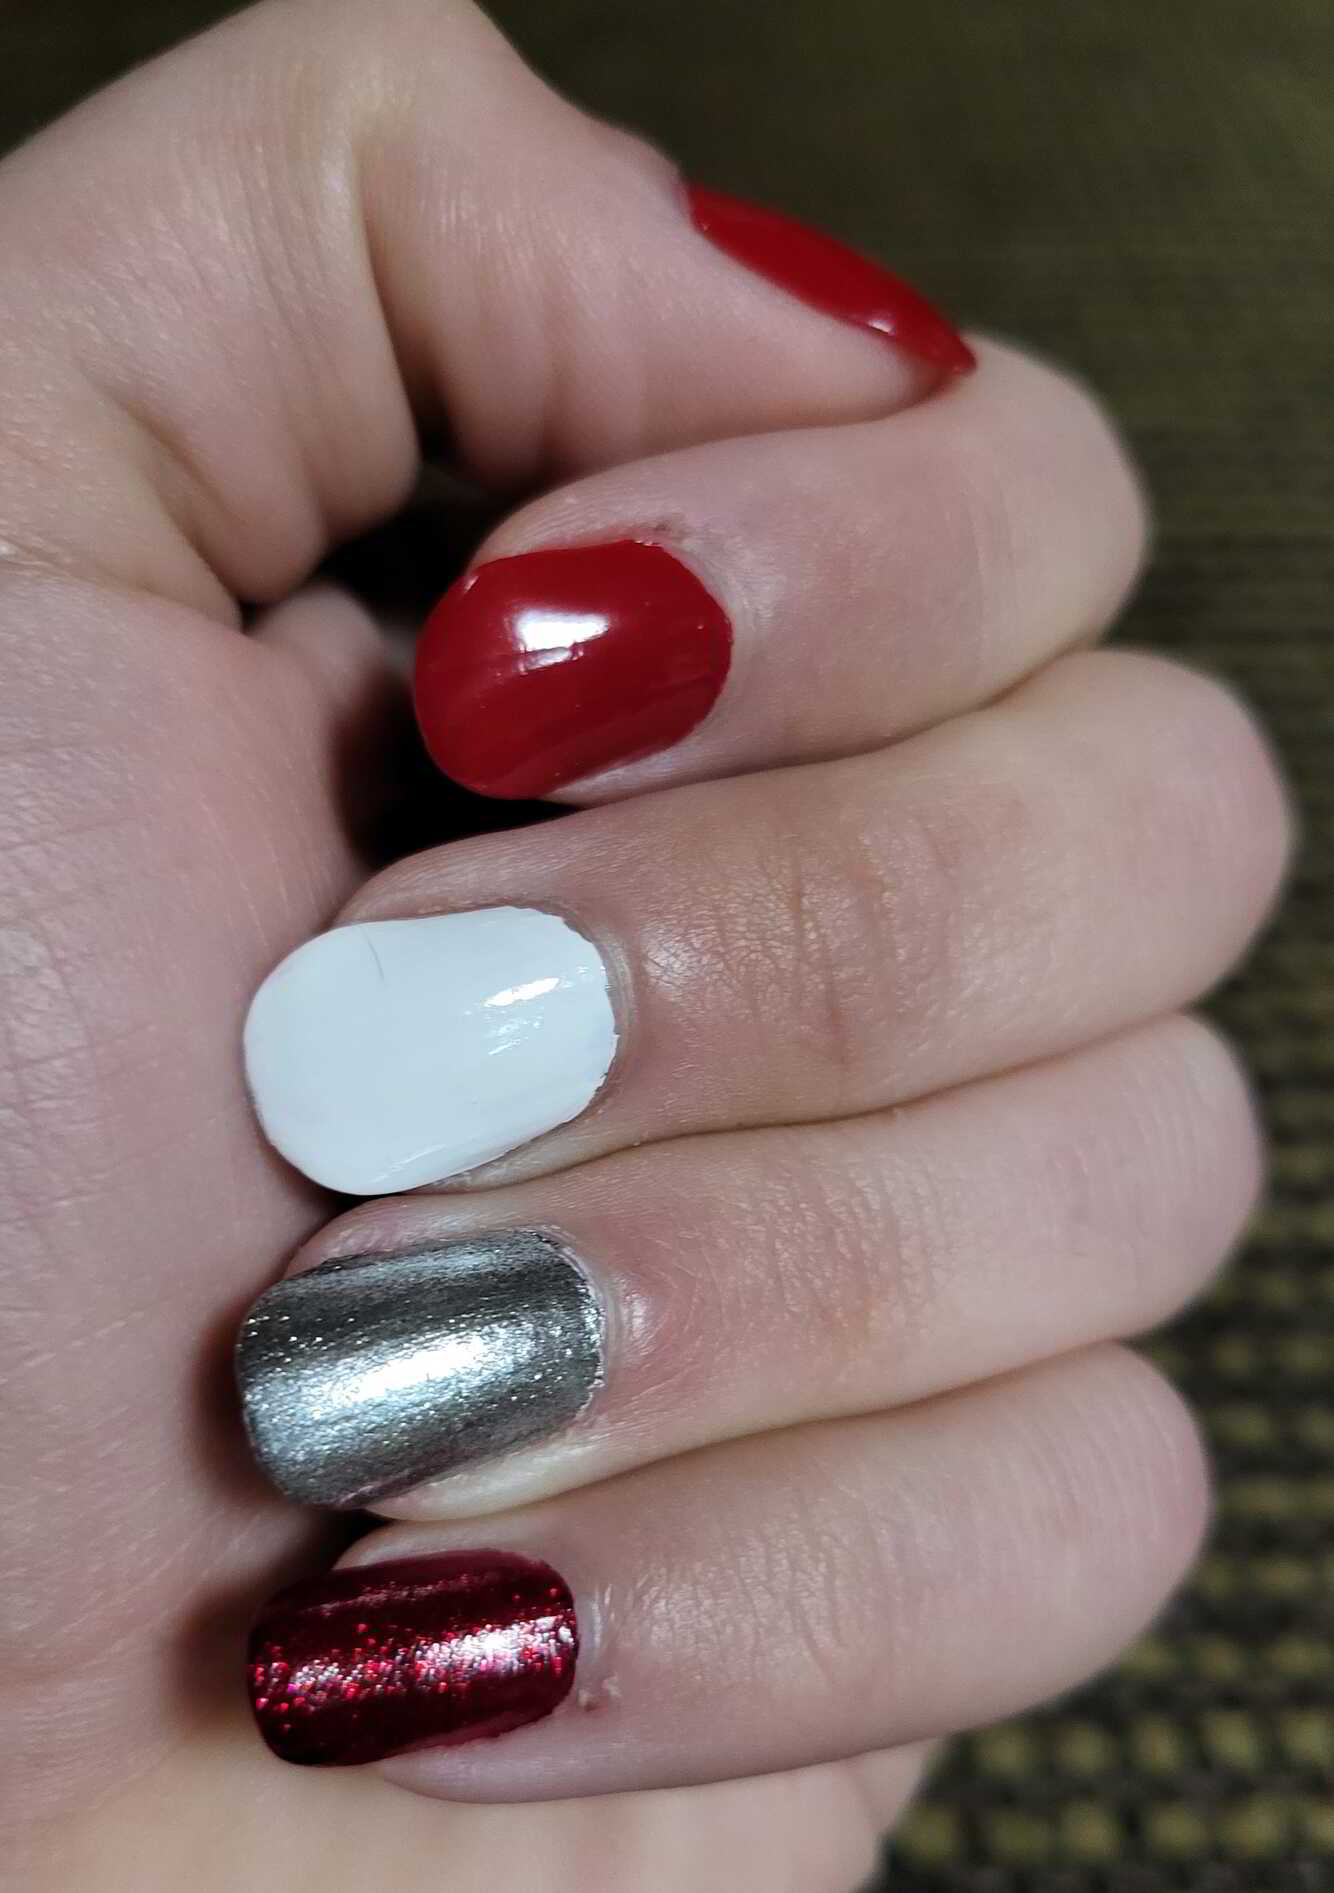 Nail polish manicure of shade OPI Big Apple Red, OPI Alpine Snow,China Glaze Check Out the Silver Fox,China Glaze Ruby Pumps,OPI Top Coat